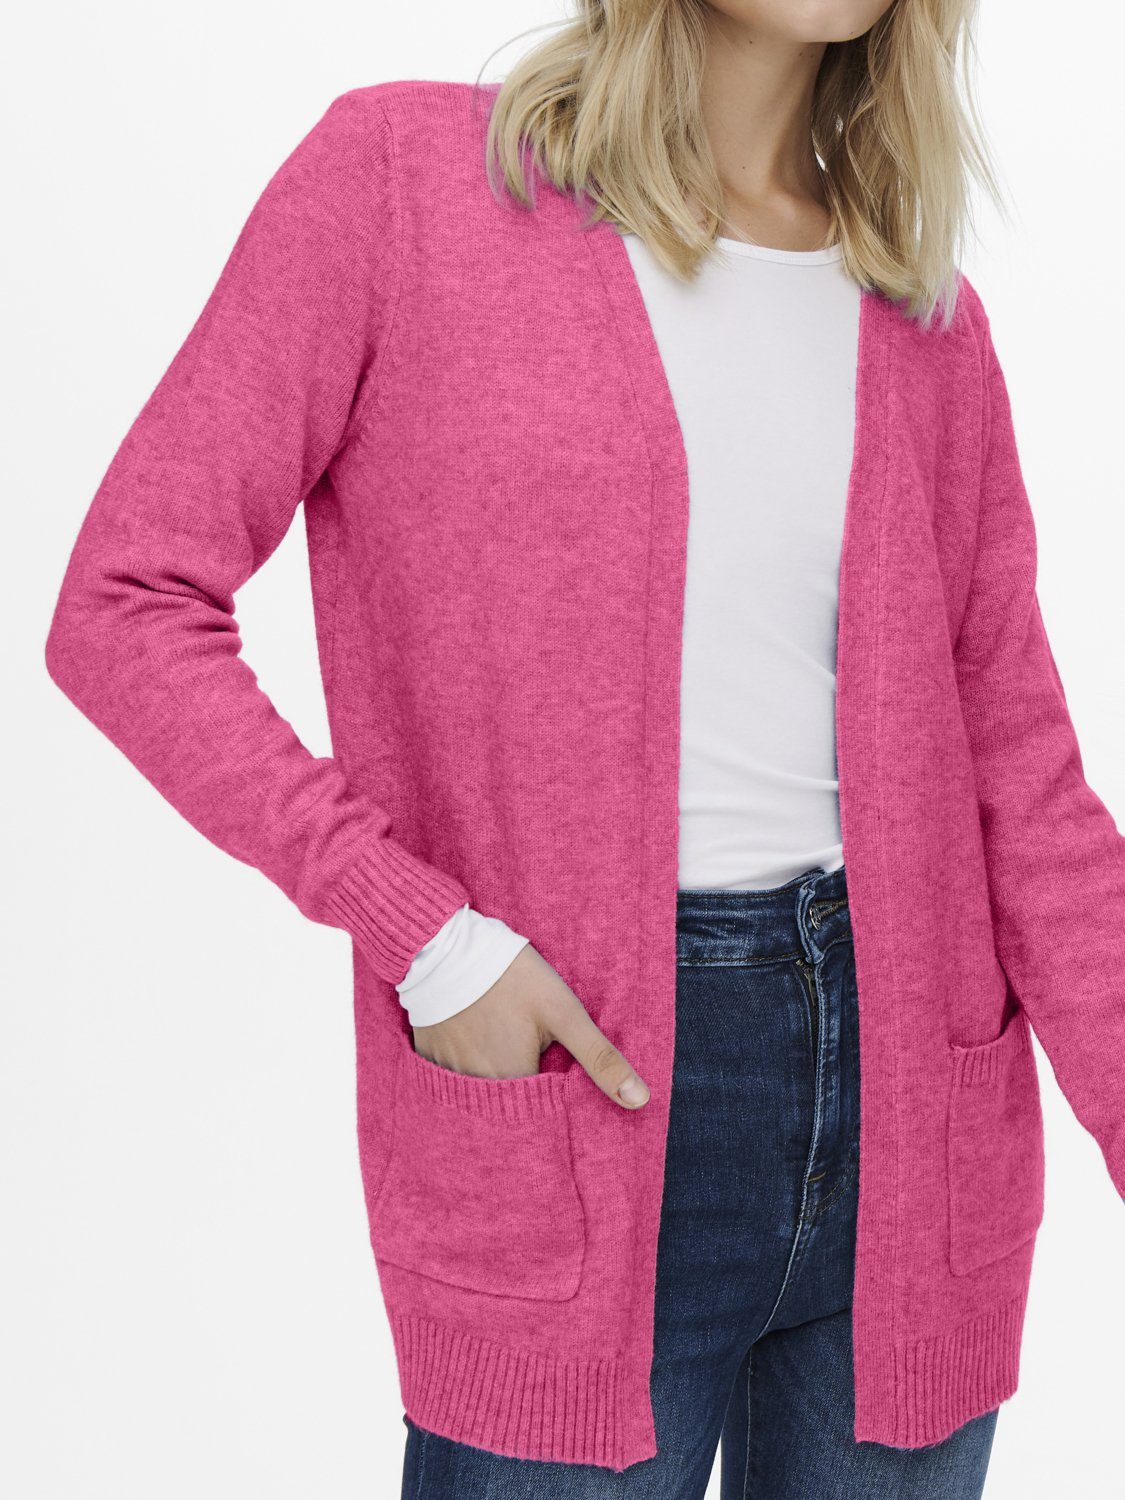 Pink Open Only OnlLesly - Damen offen female Knt Cardigan Strick-Jacke Cardigan ONLY